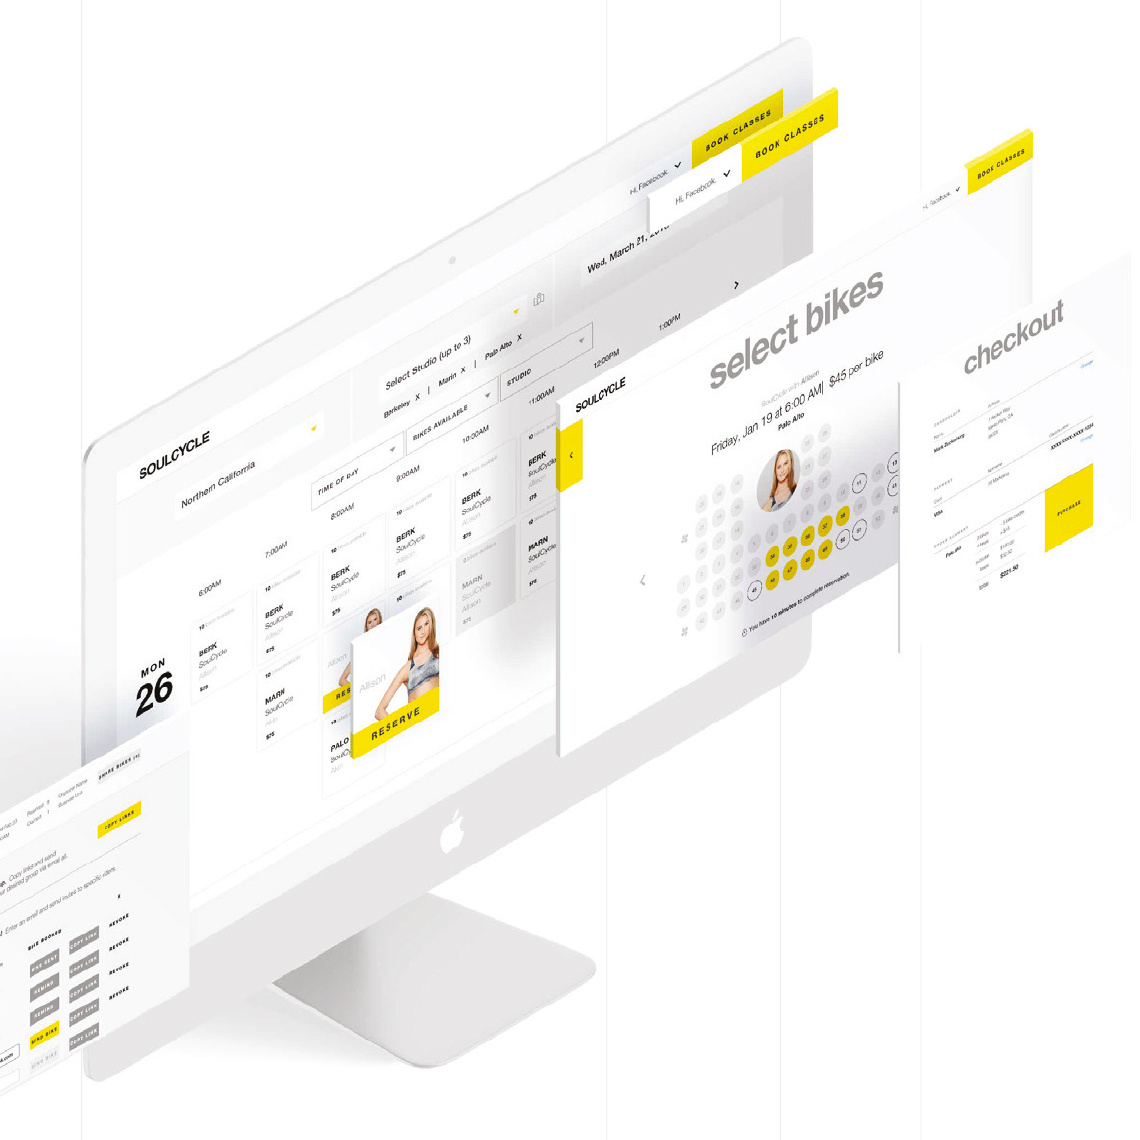 SoulCycle SweatWorks software platform